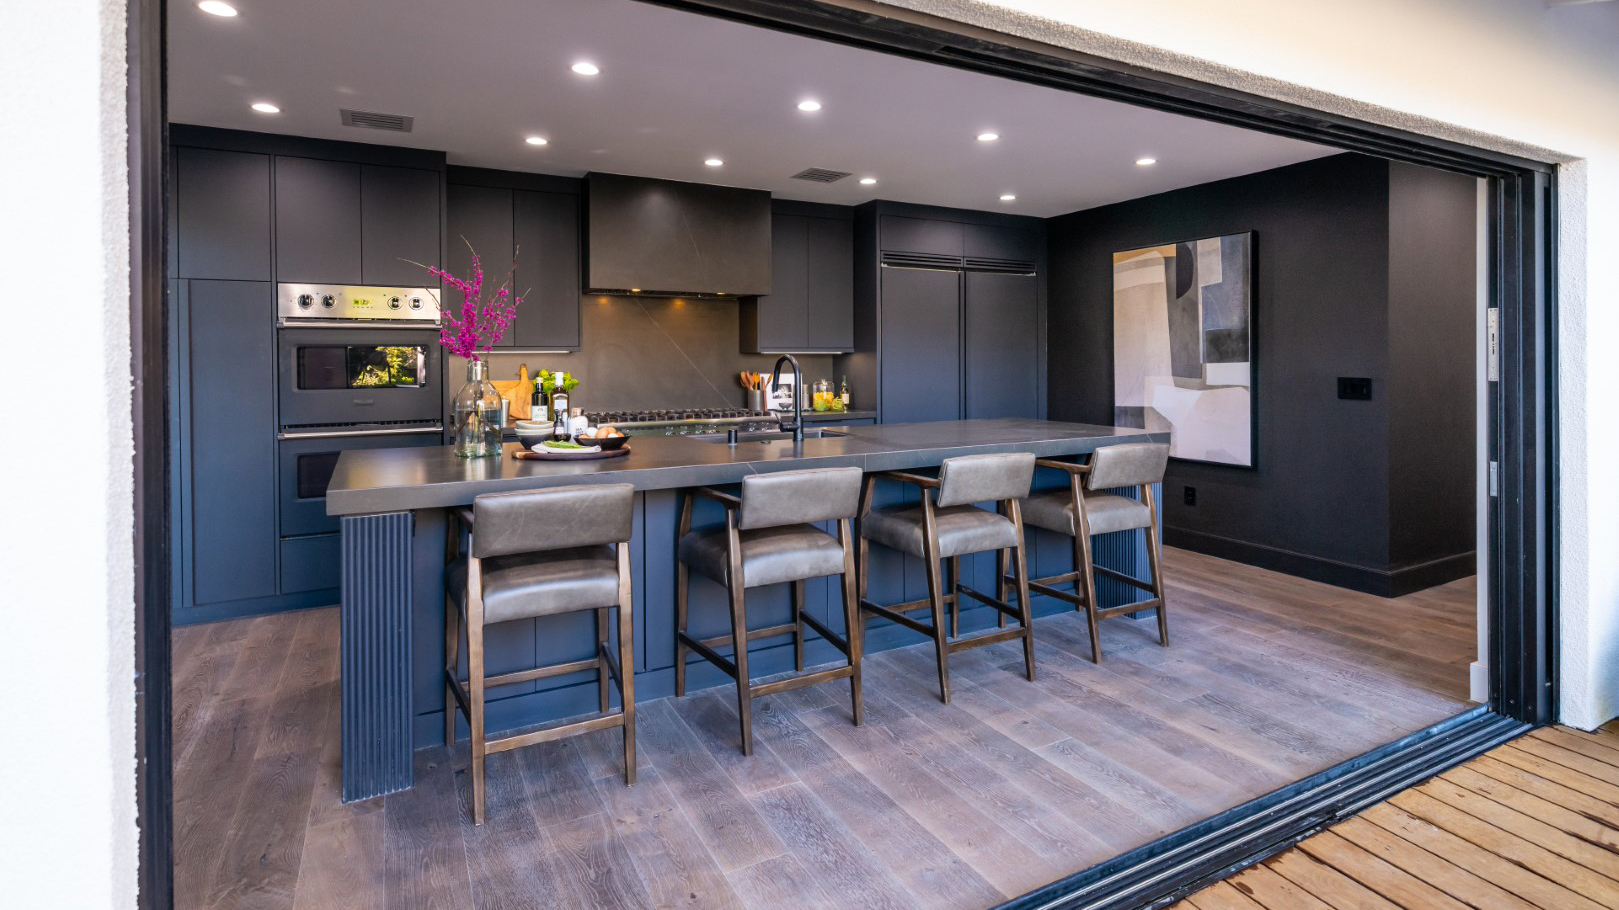 The kitchen of LeAnn Rimes' friend Roger's home after renovations, as seen on Celebrity IOU.